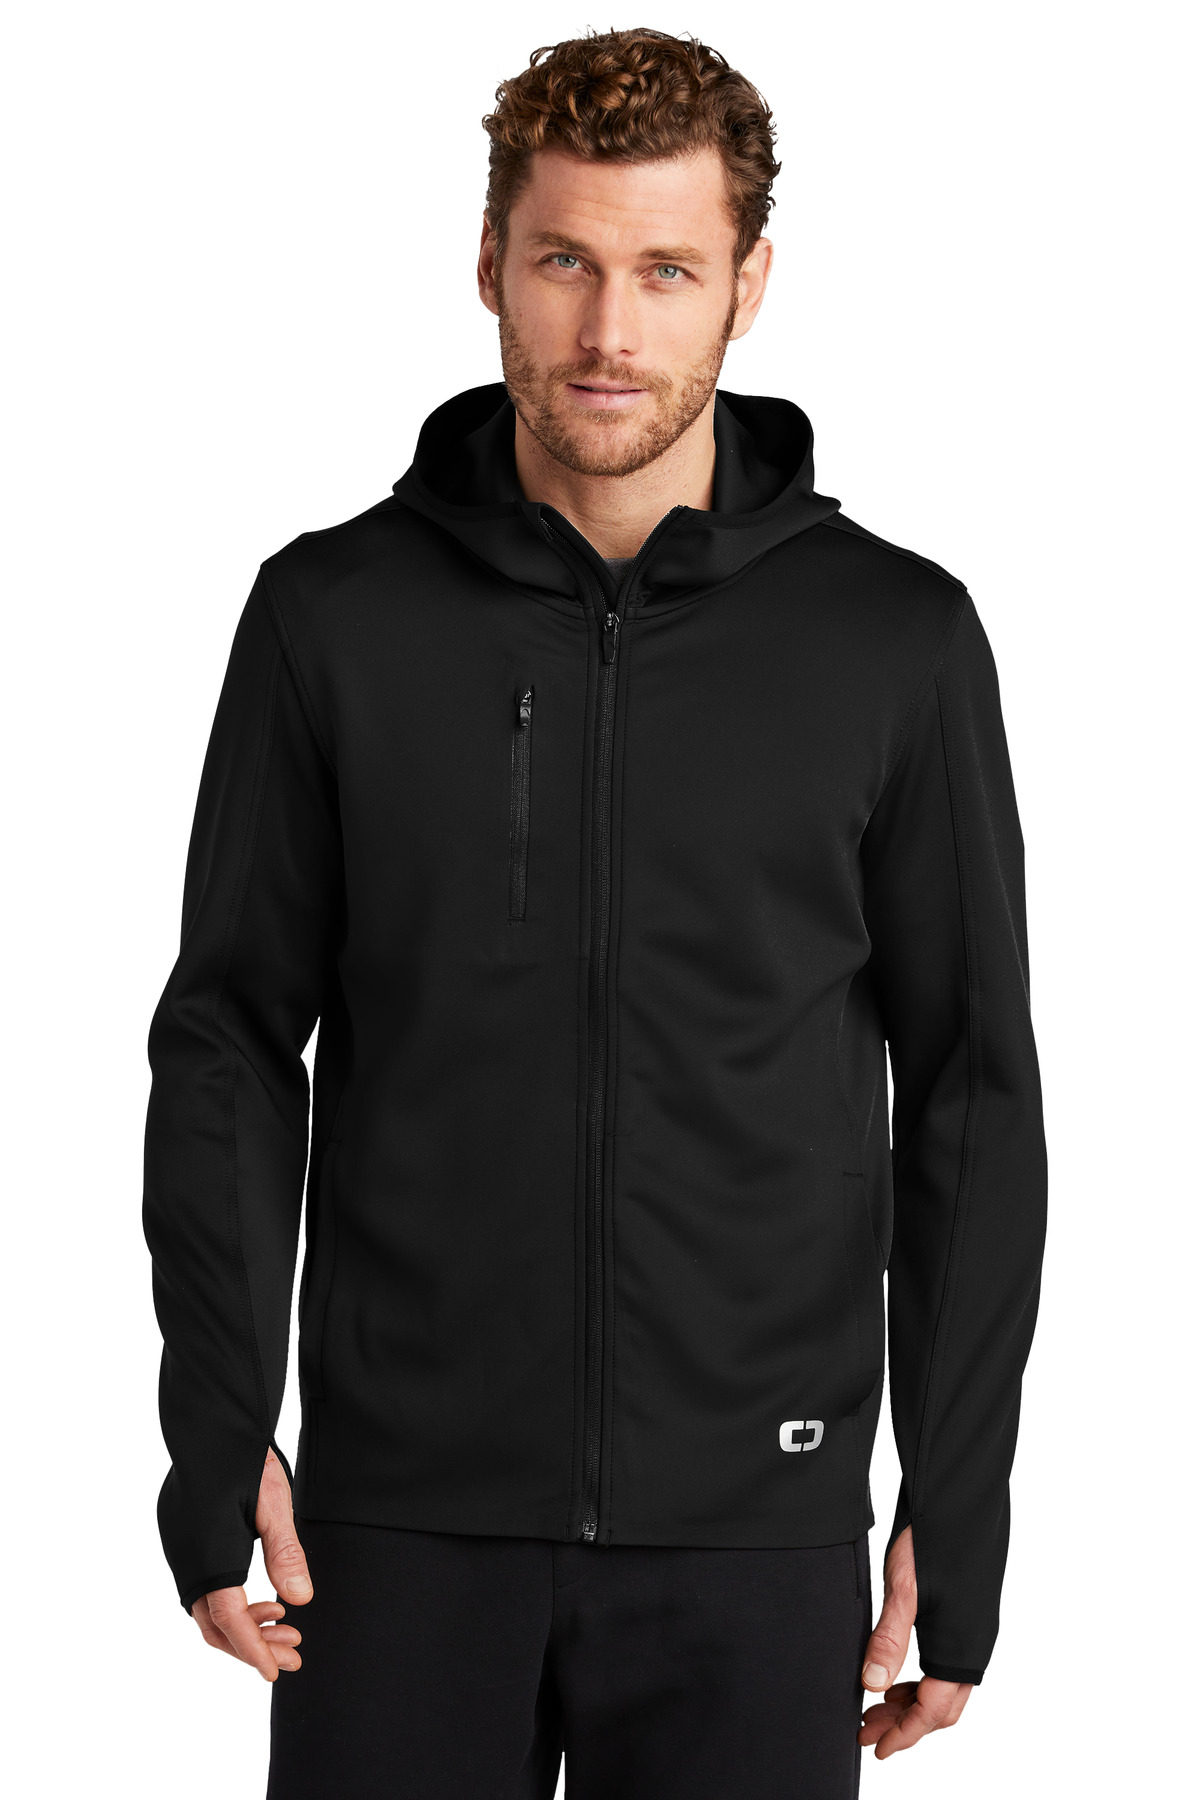 OGIO Outerwear for Corporate & Hospitality ® ENDURANCE Stealth Full-Zip Jacket.-OGIO